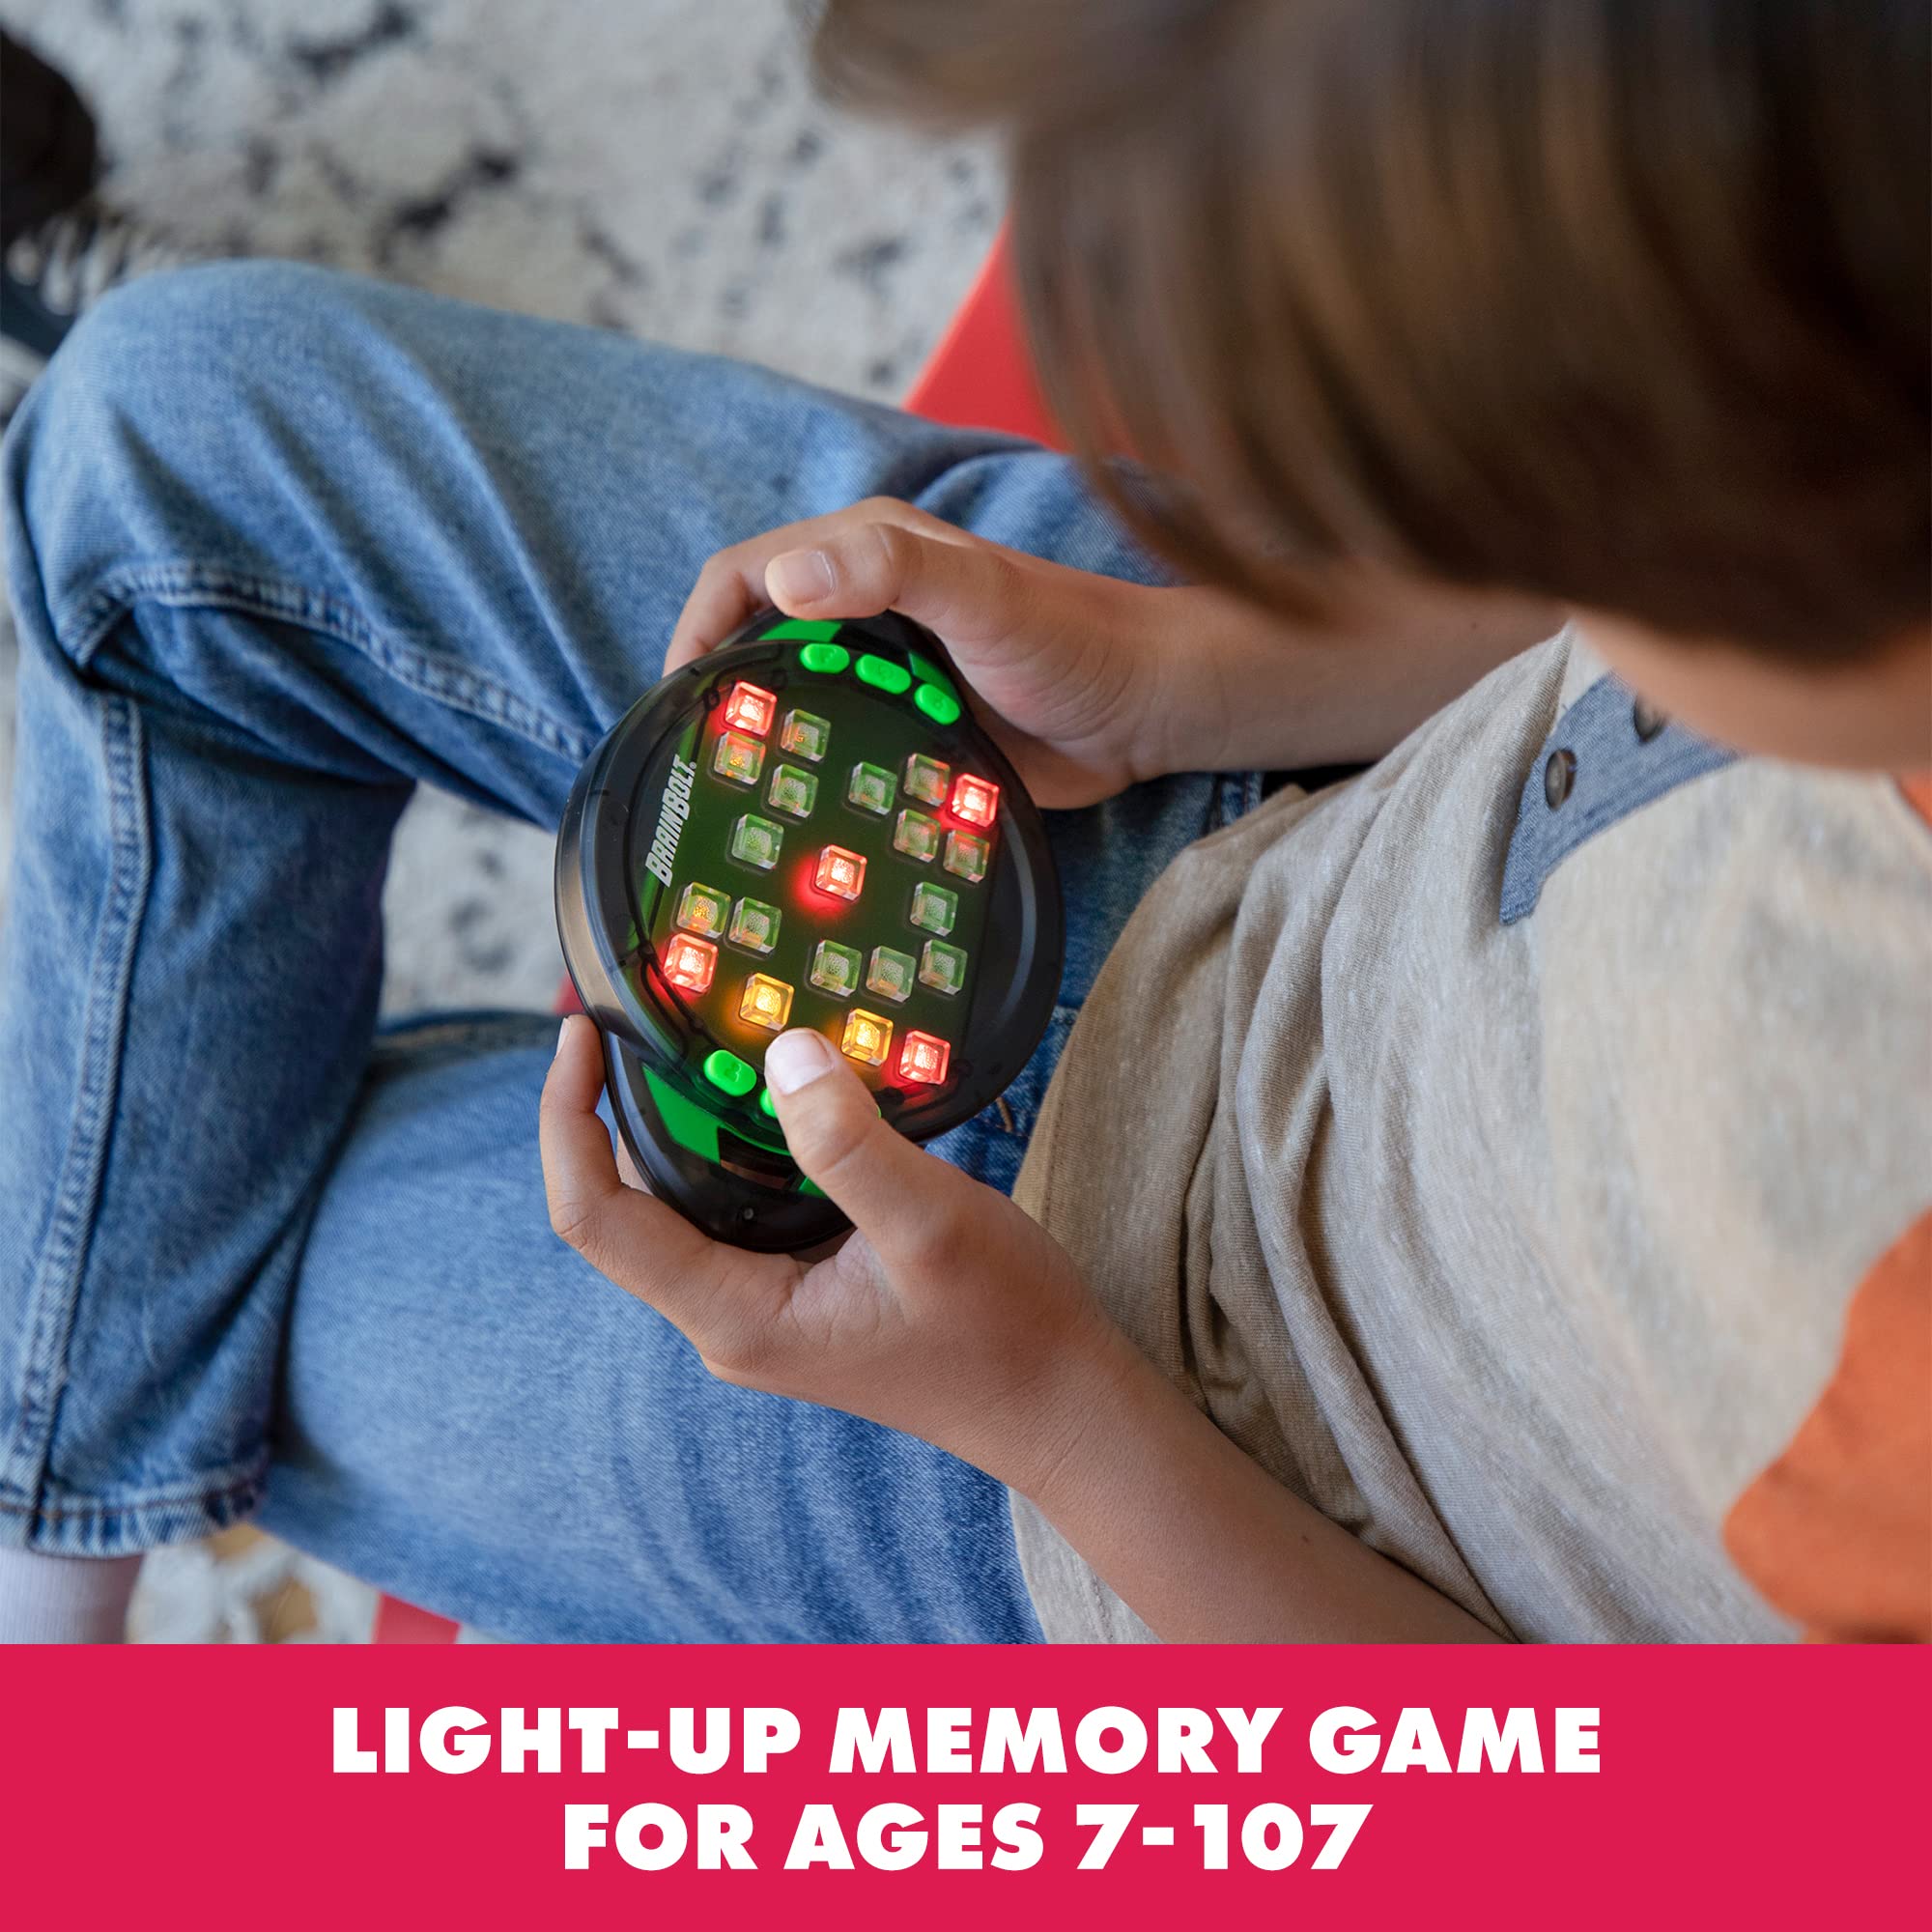 Educational Insights BrainBolt Handheld Electronic Memory Game with Lights & Sounds, 1 or 2 Players, Ages 7+